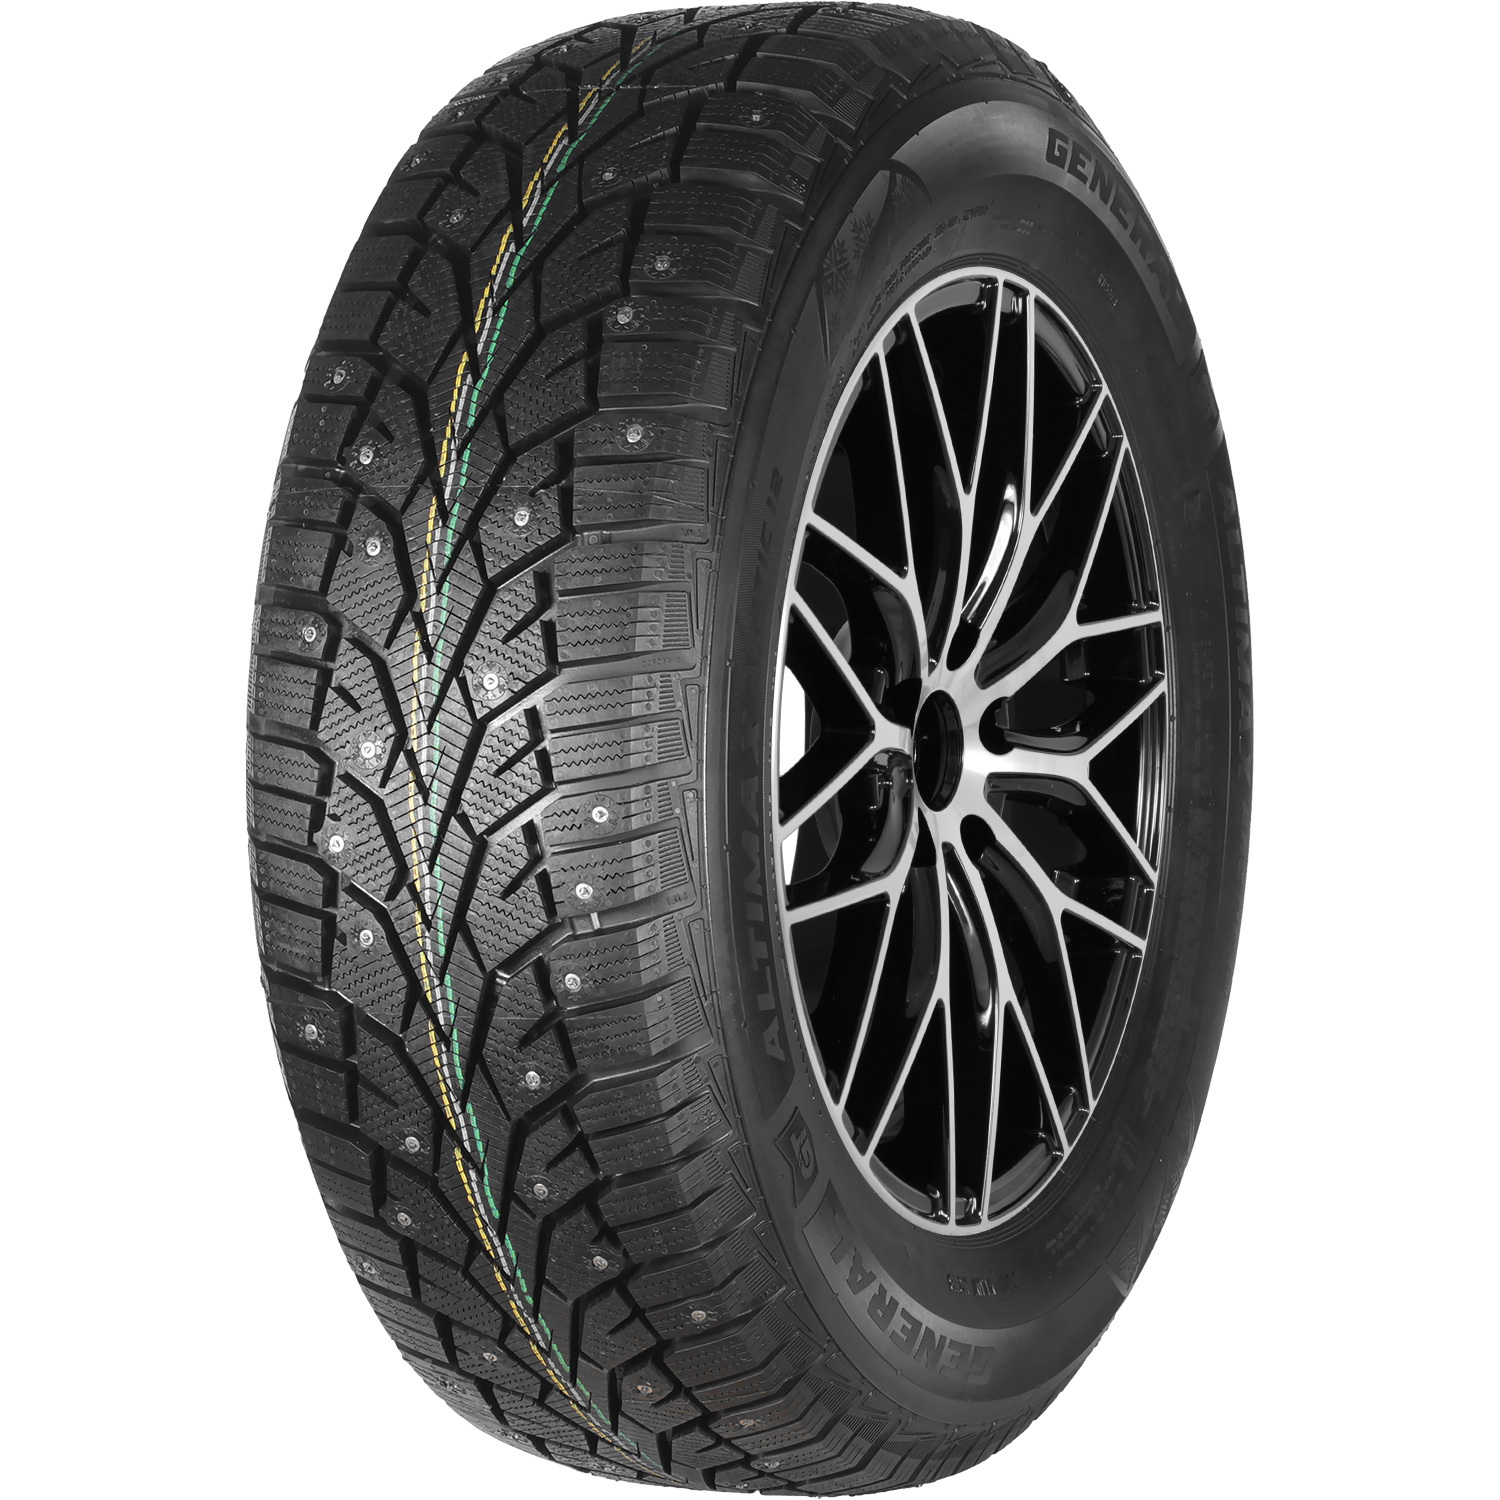 Автомобильная шина General Tire 175/70 R14 88T Шипованные tire cover central ocean sunrise sun moon spare tire cover select tire size back up camera in menu custom sized to any